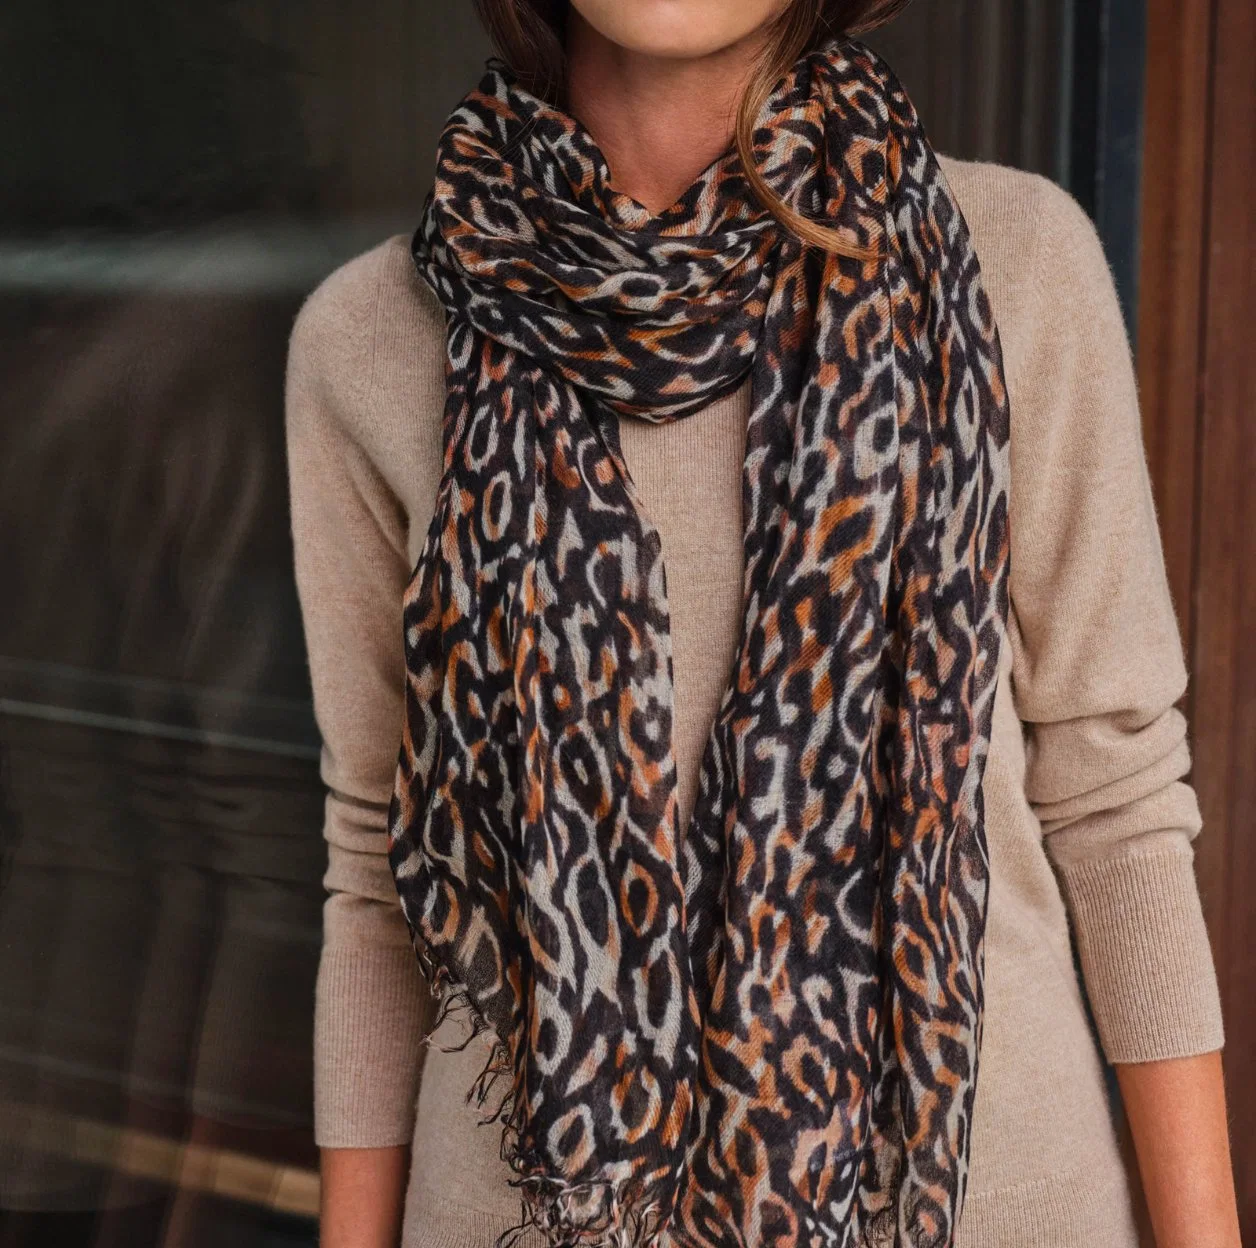 Original Cashmere Knitted Light-Weight Printed Ladies Scarf Apparel Accessories